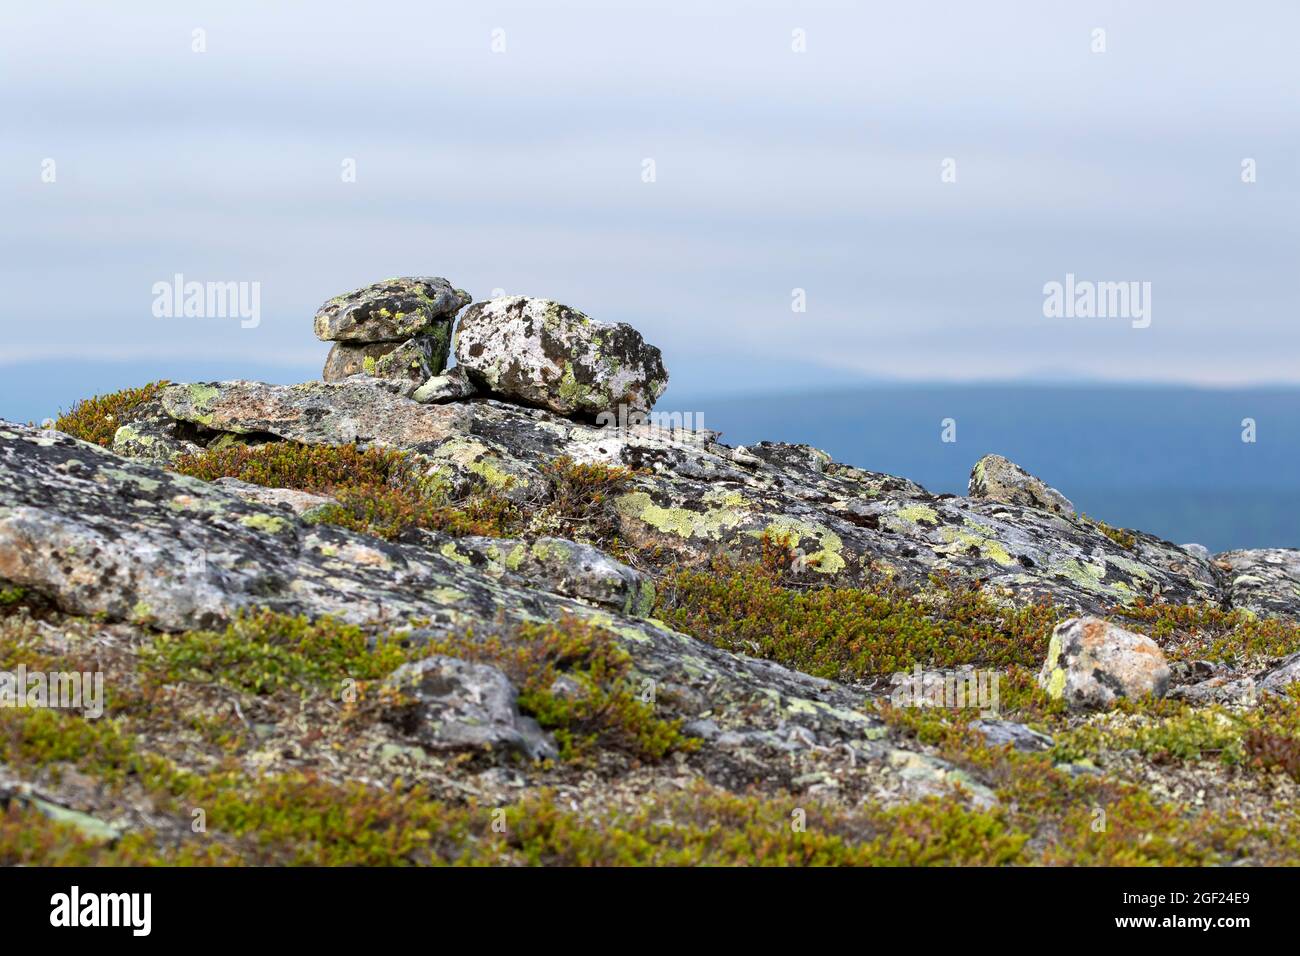 Stony landscape covered with mosses, lichen and shrubs in UKK National Park at Kiilopää, Northern Finland Stock Photo